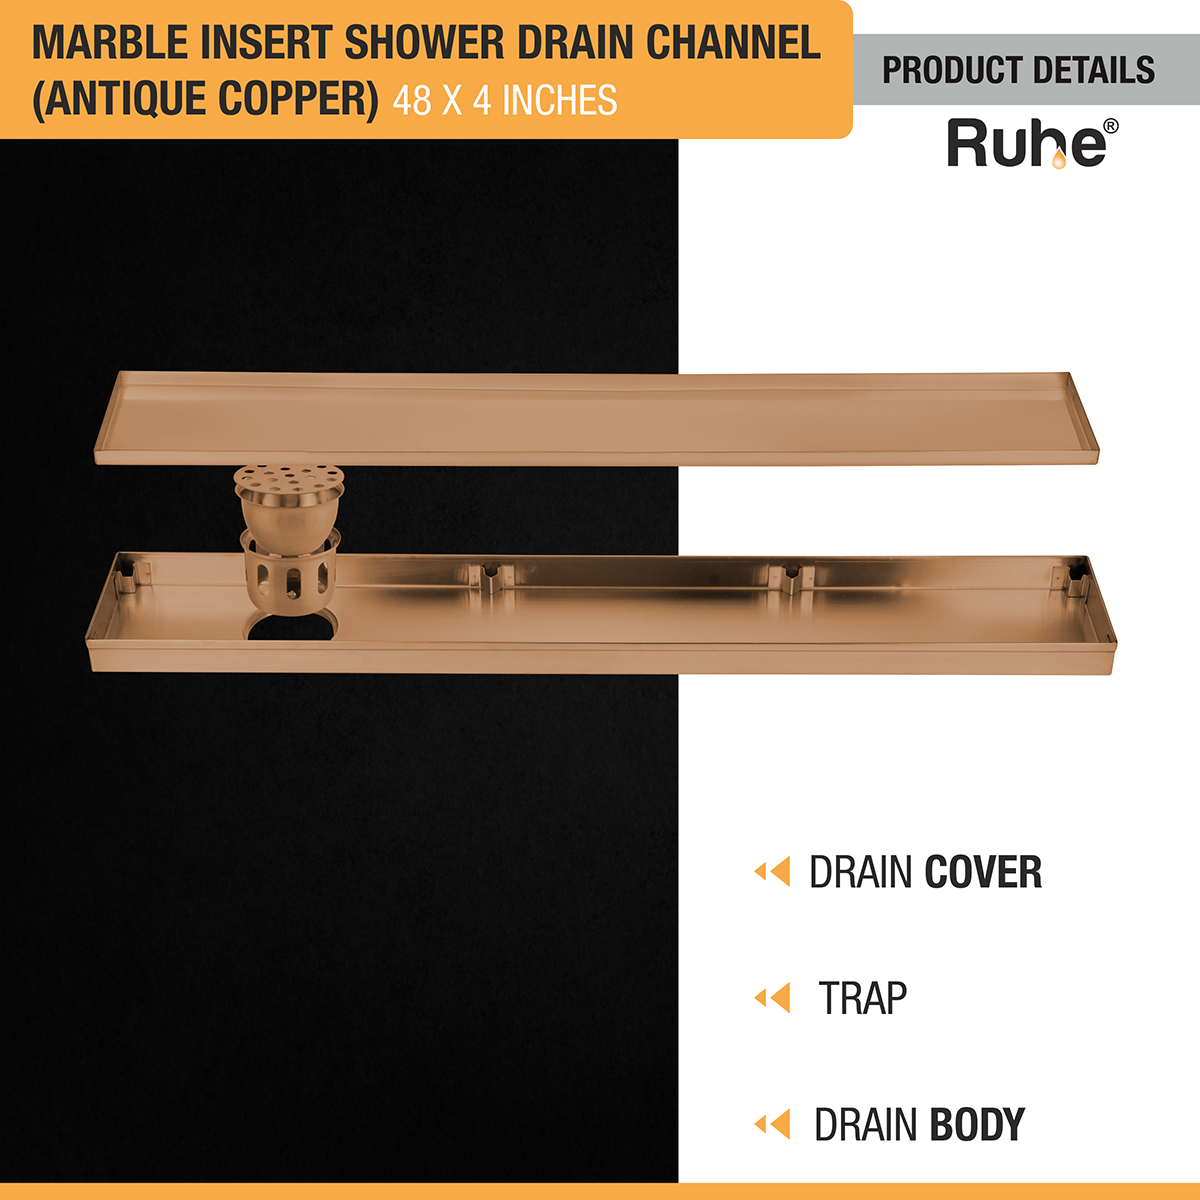 Marble Insert Shower Drain Channel (48 x 4 Inches) ROSE GOLD PVD Coated with drain cover, trap, and drain body